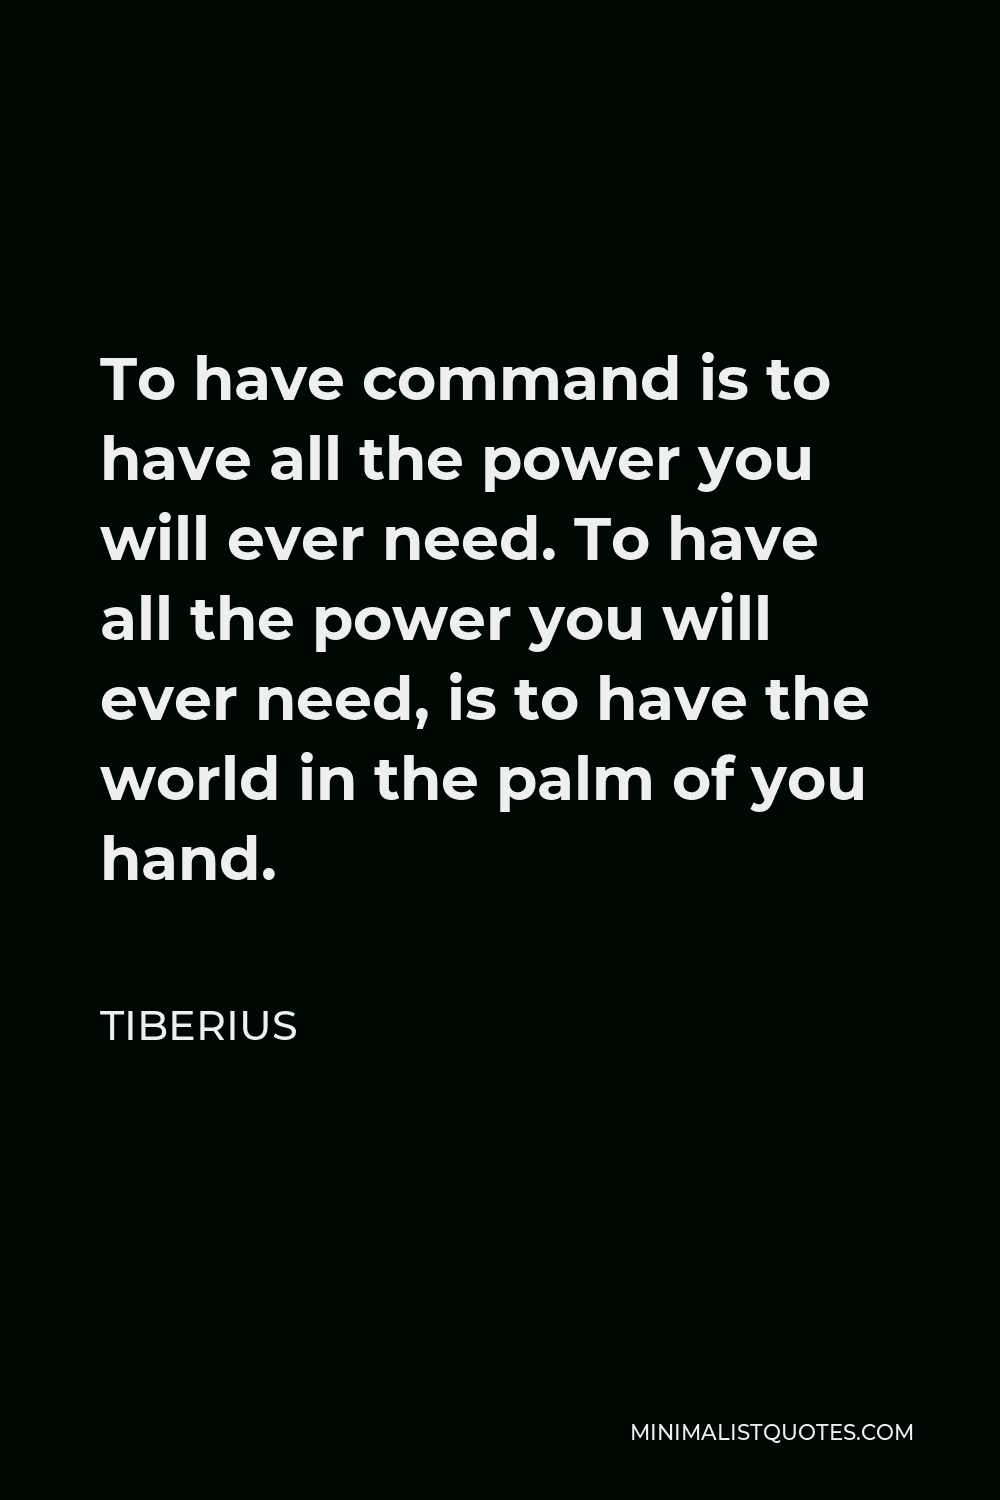 Tiberius Quote - To have command is to have all the power you will ever need. To have all the power you will ever need, is to have the world in the palm of you hand.